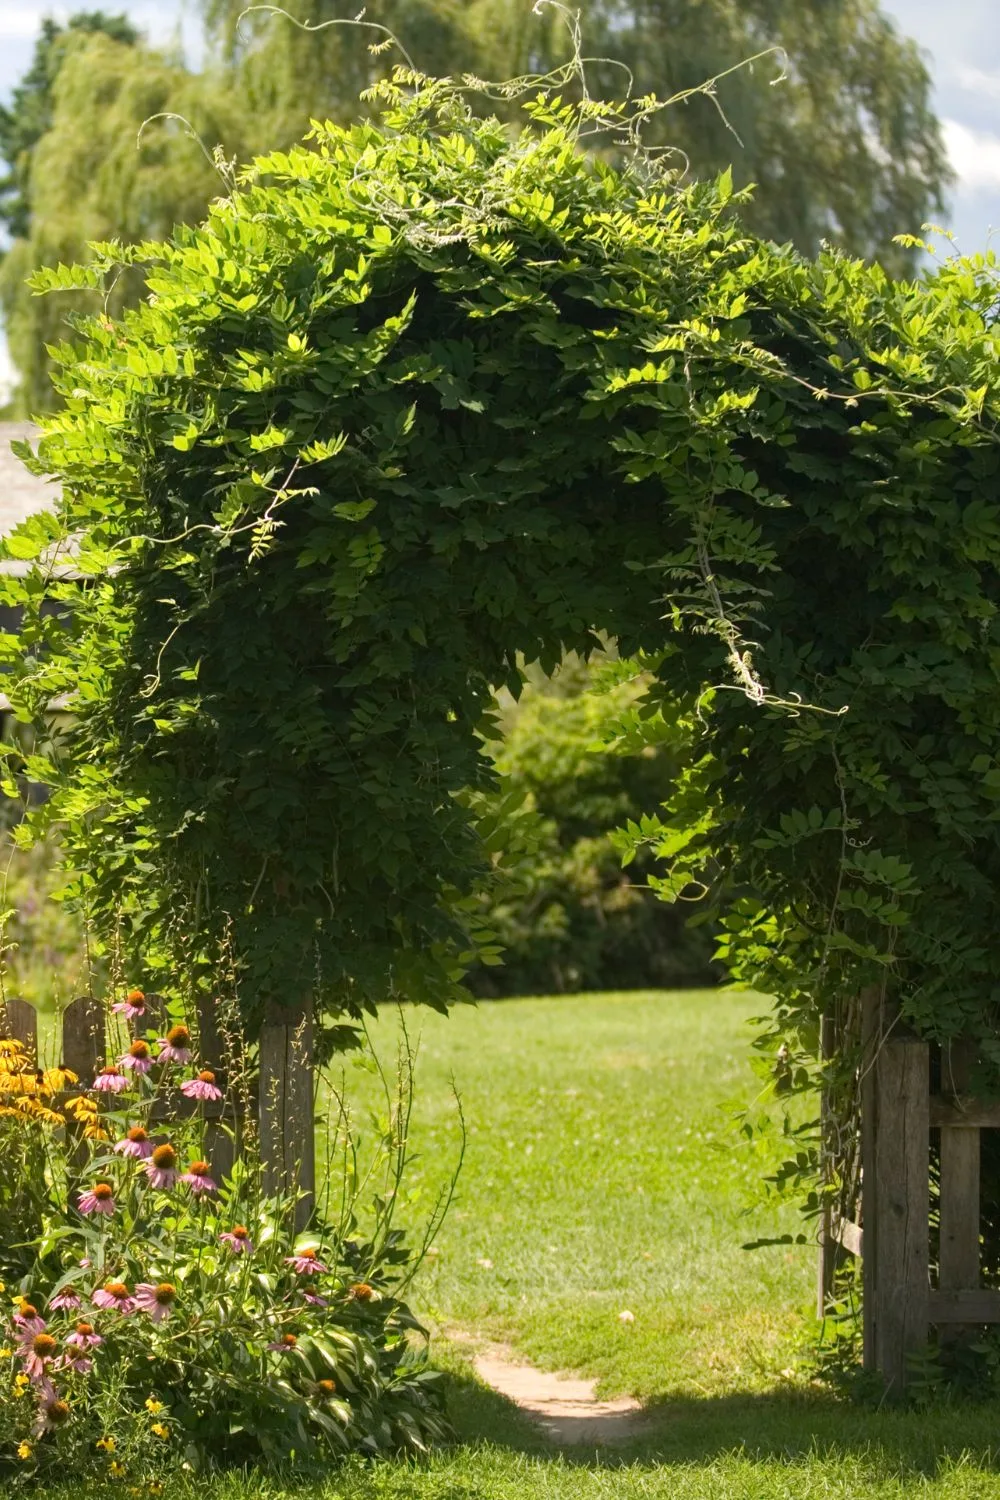 greenery-covered arching arbor with some cone flowers by its side.